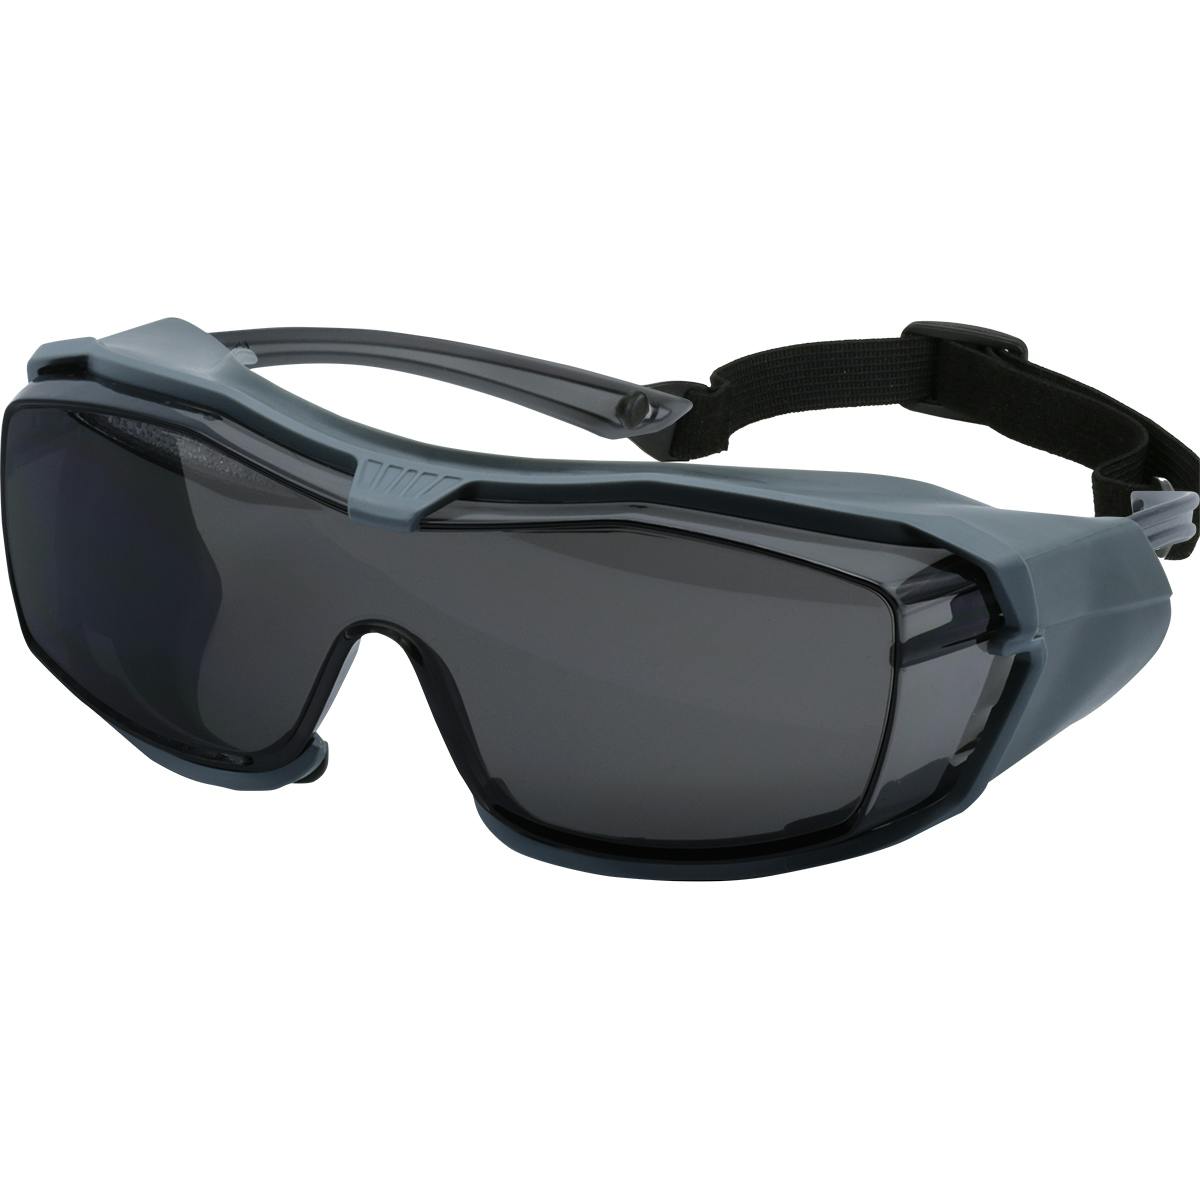 OTG Safety Glasses with Rubber Gasket, Headband, Gray Lens and Fogless® 3Sixty™ Coating, Light Gray (250-96-1551) - OS_0